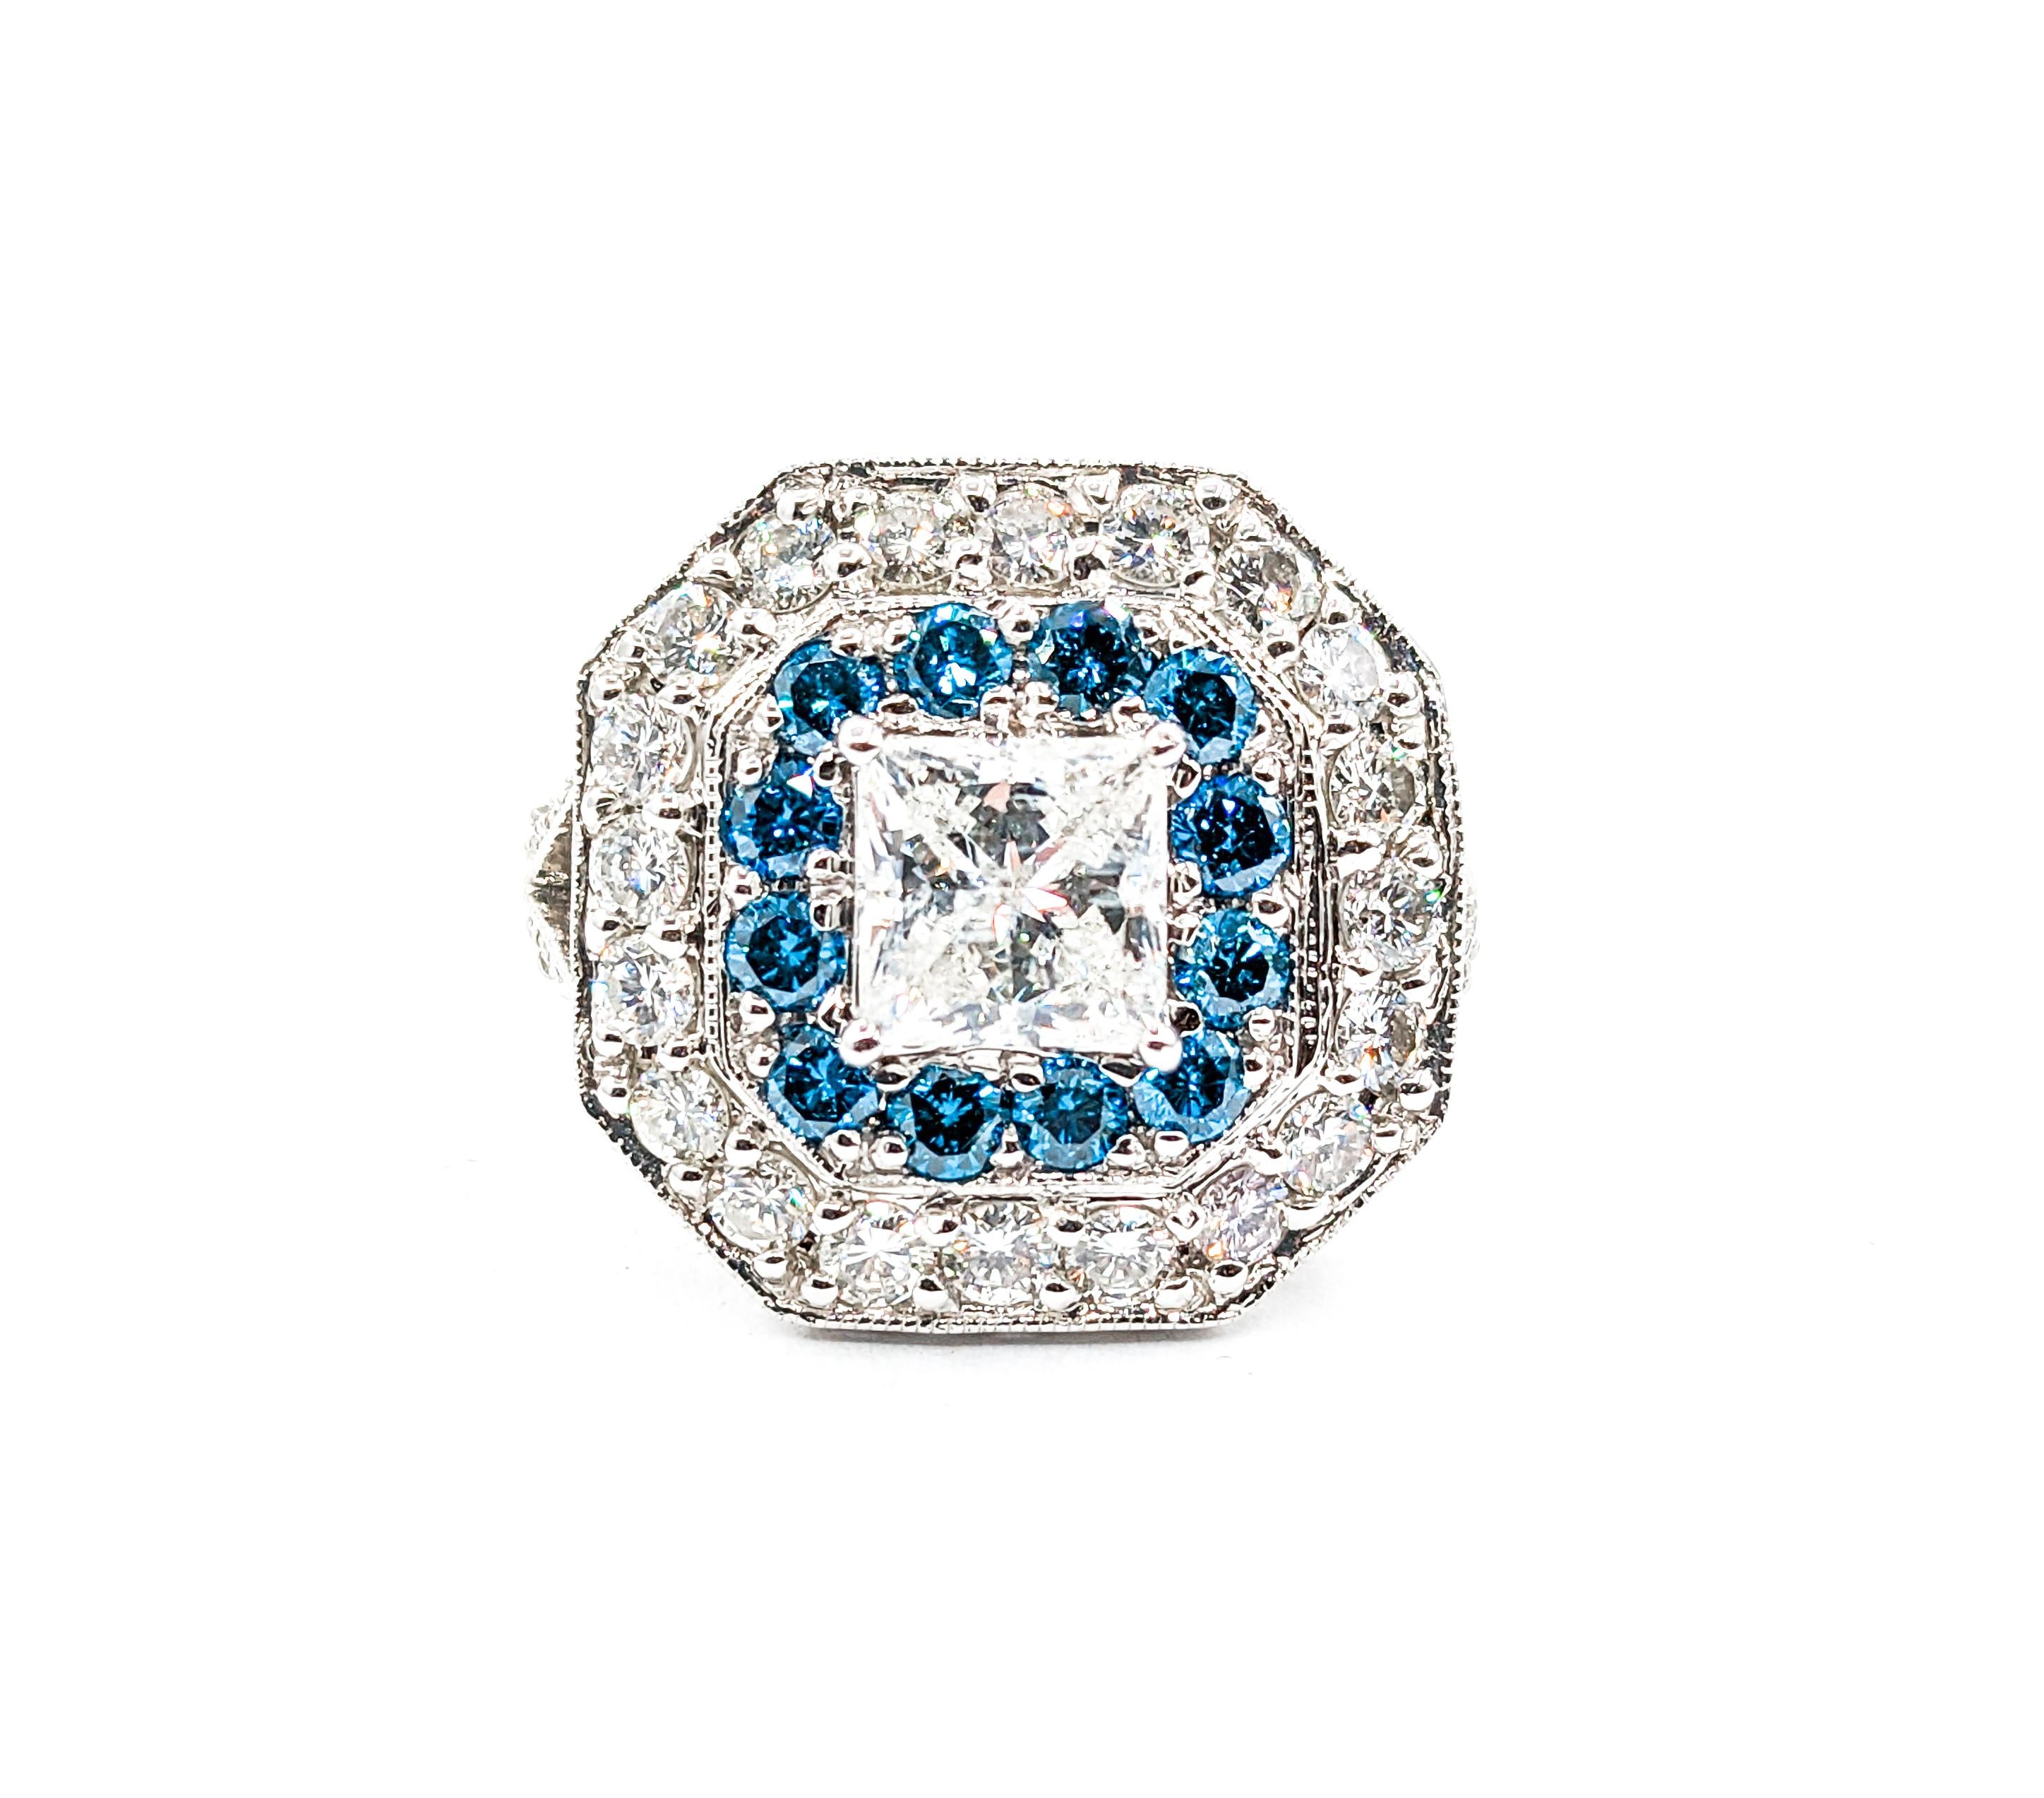 Superb White and Blue Diamond Statement Ring For Sale 6